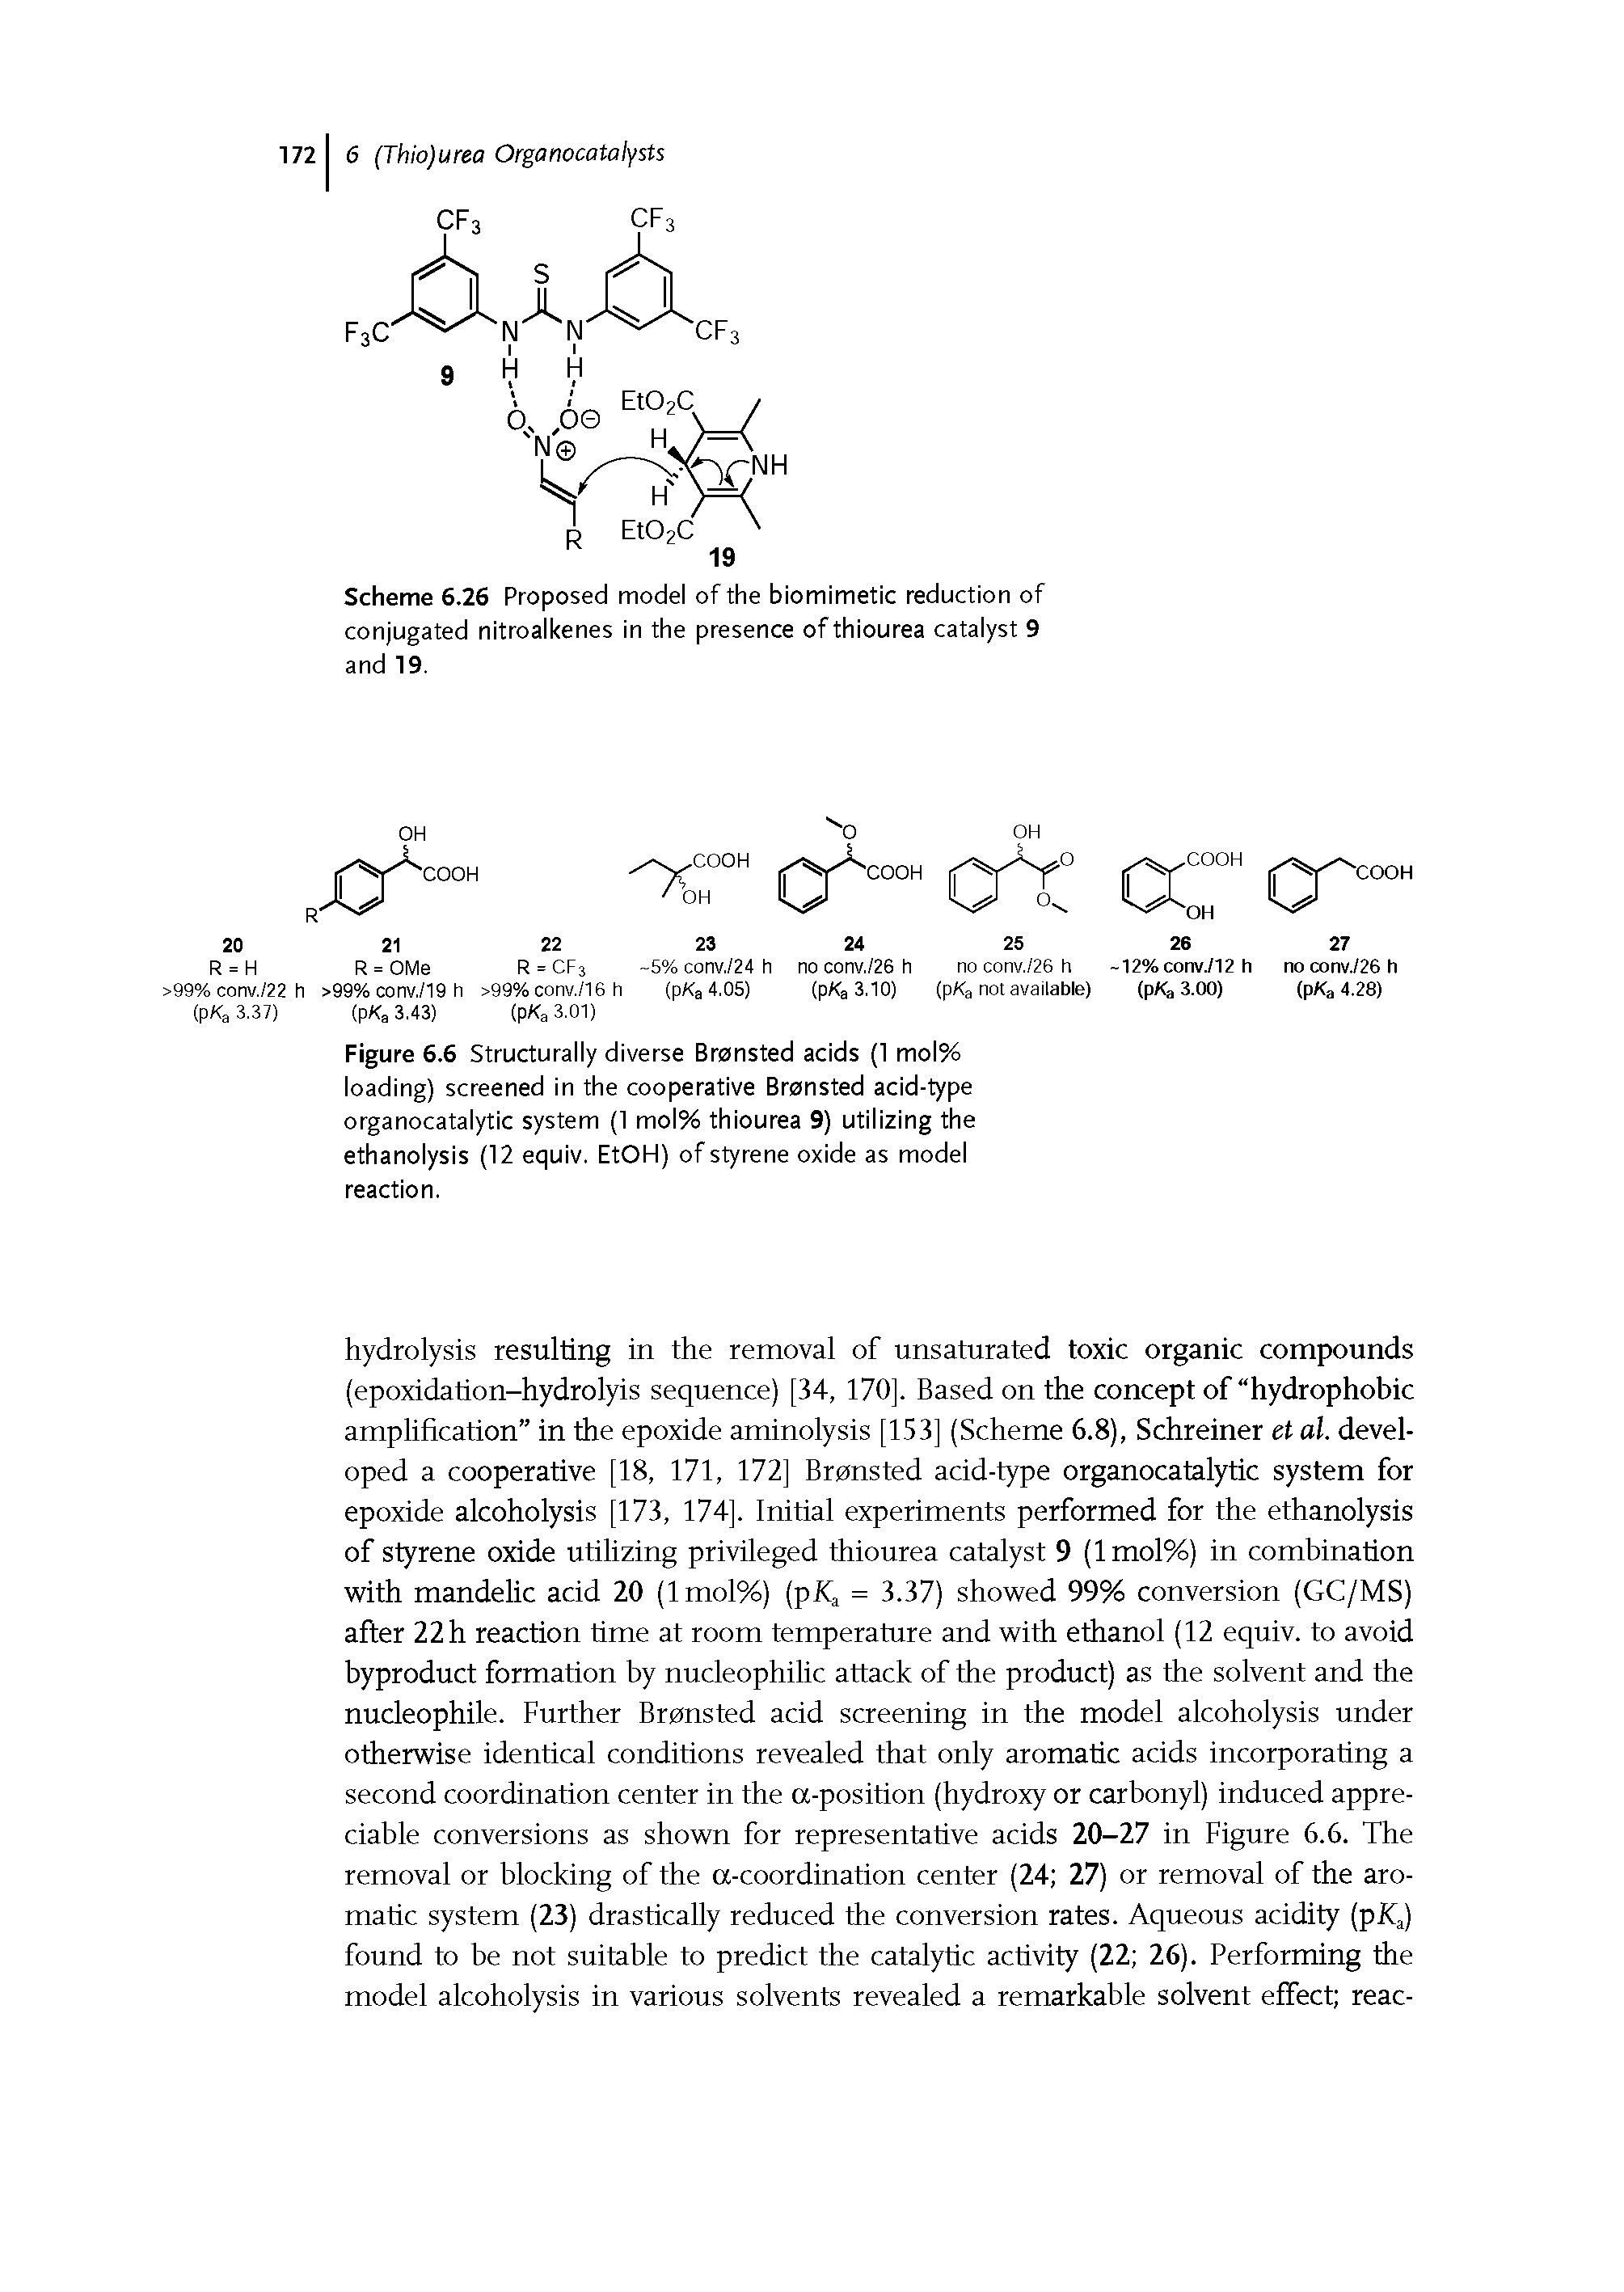 Scheme 6.26 Proposed model of the biomimetic reduction of conjugated nitroalkenes in the presence of thiourea catalyst 9 and 19.